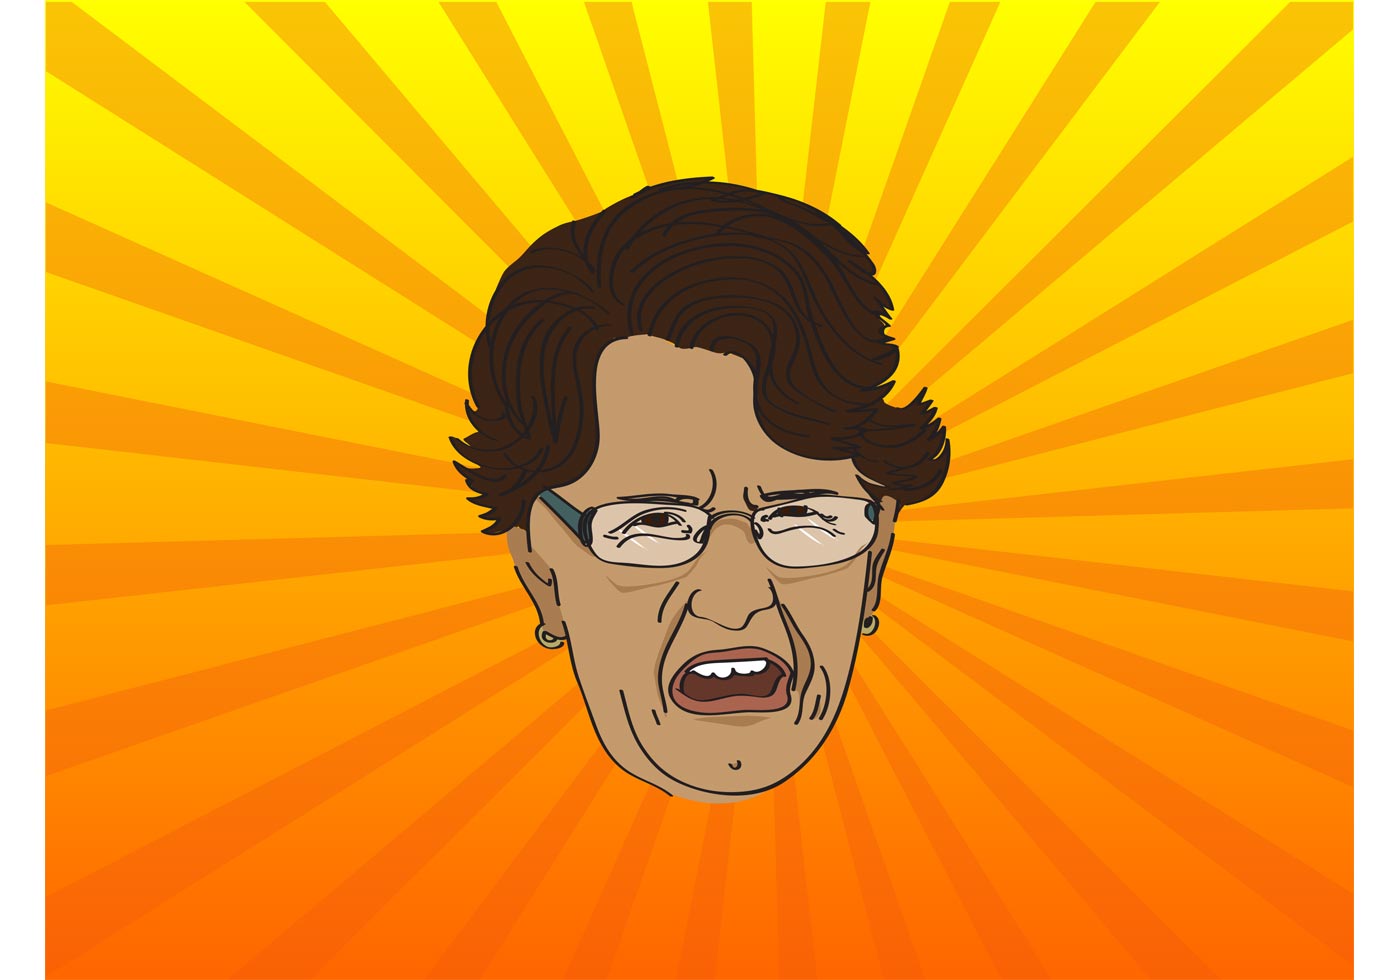 Download Angry Old Lady - Download Free Vector Art, Stock Graphics & Images